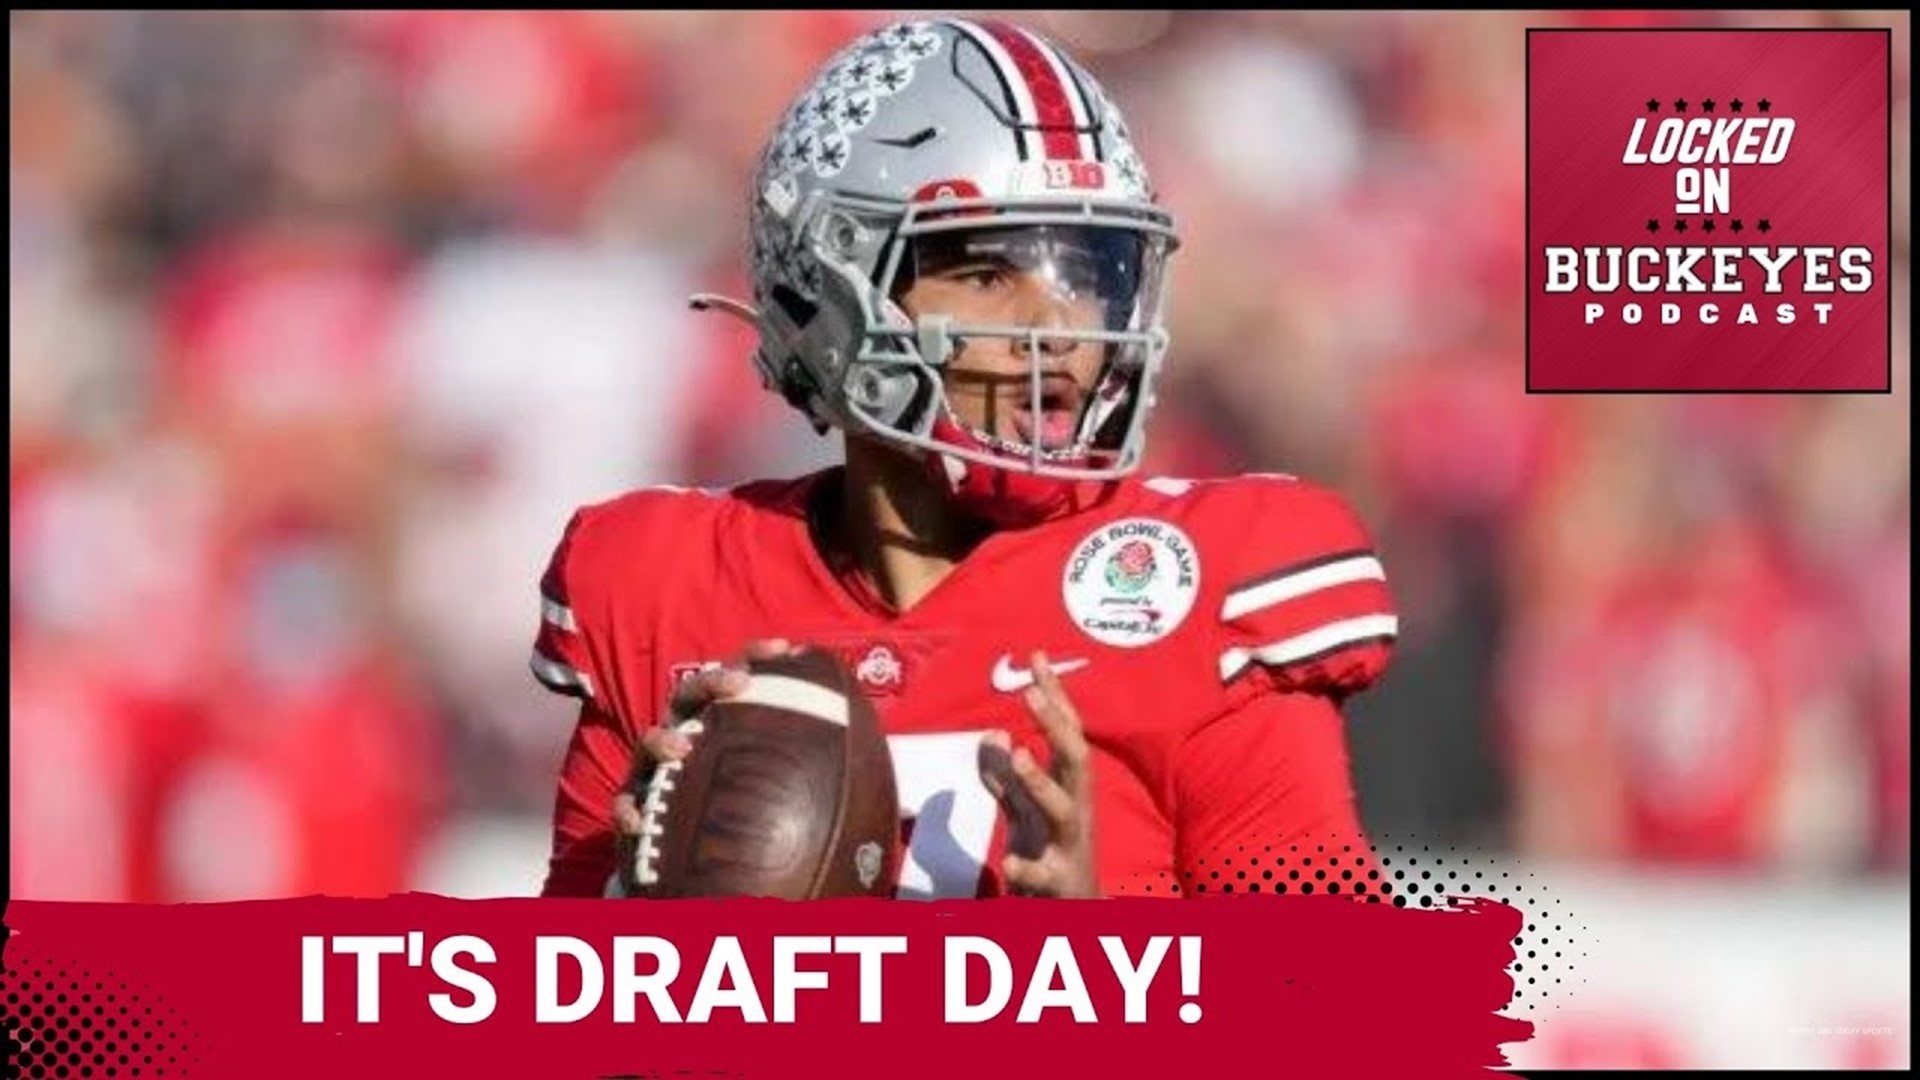 CJ Stroud Set to Have His Dreams Come True in the 2023 NFL Draft | Ohio State Buckeyes Podcast